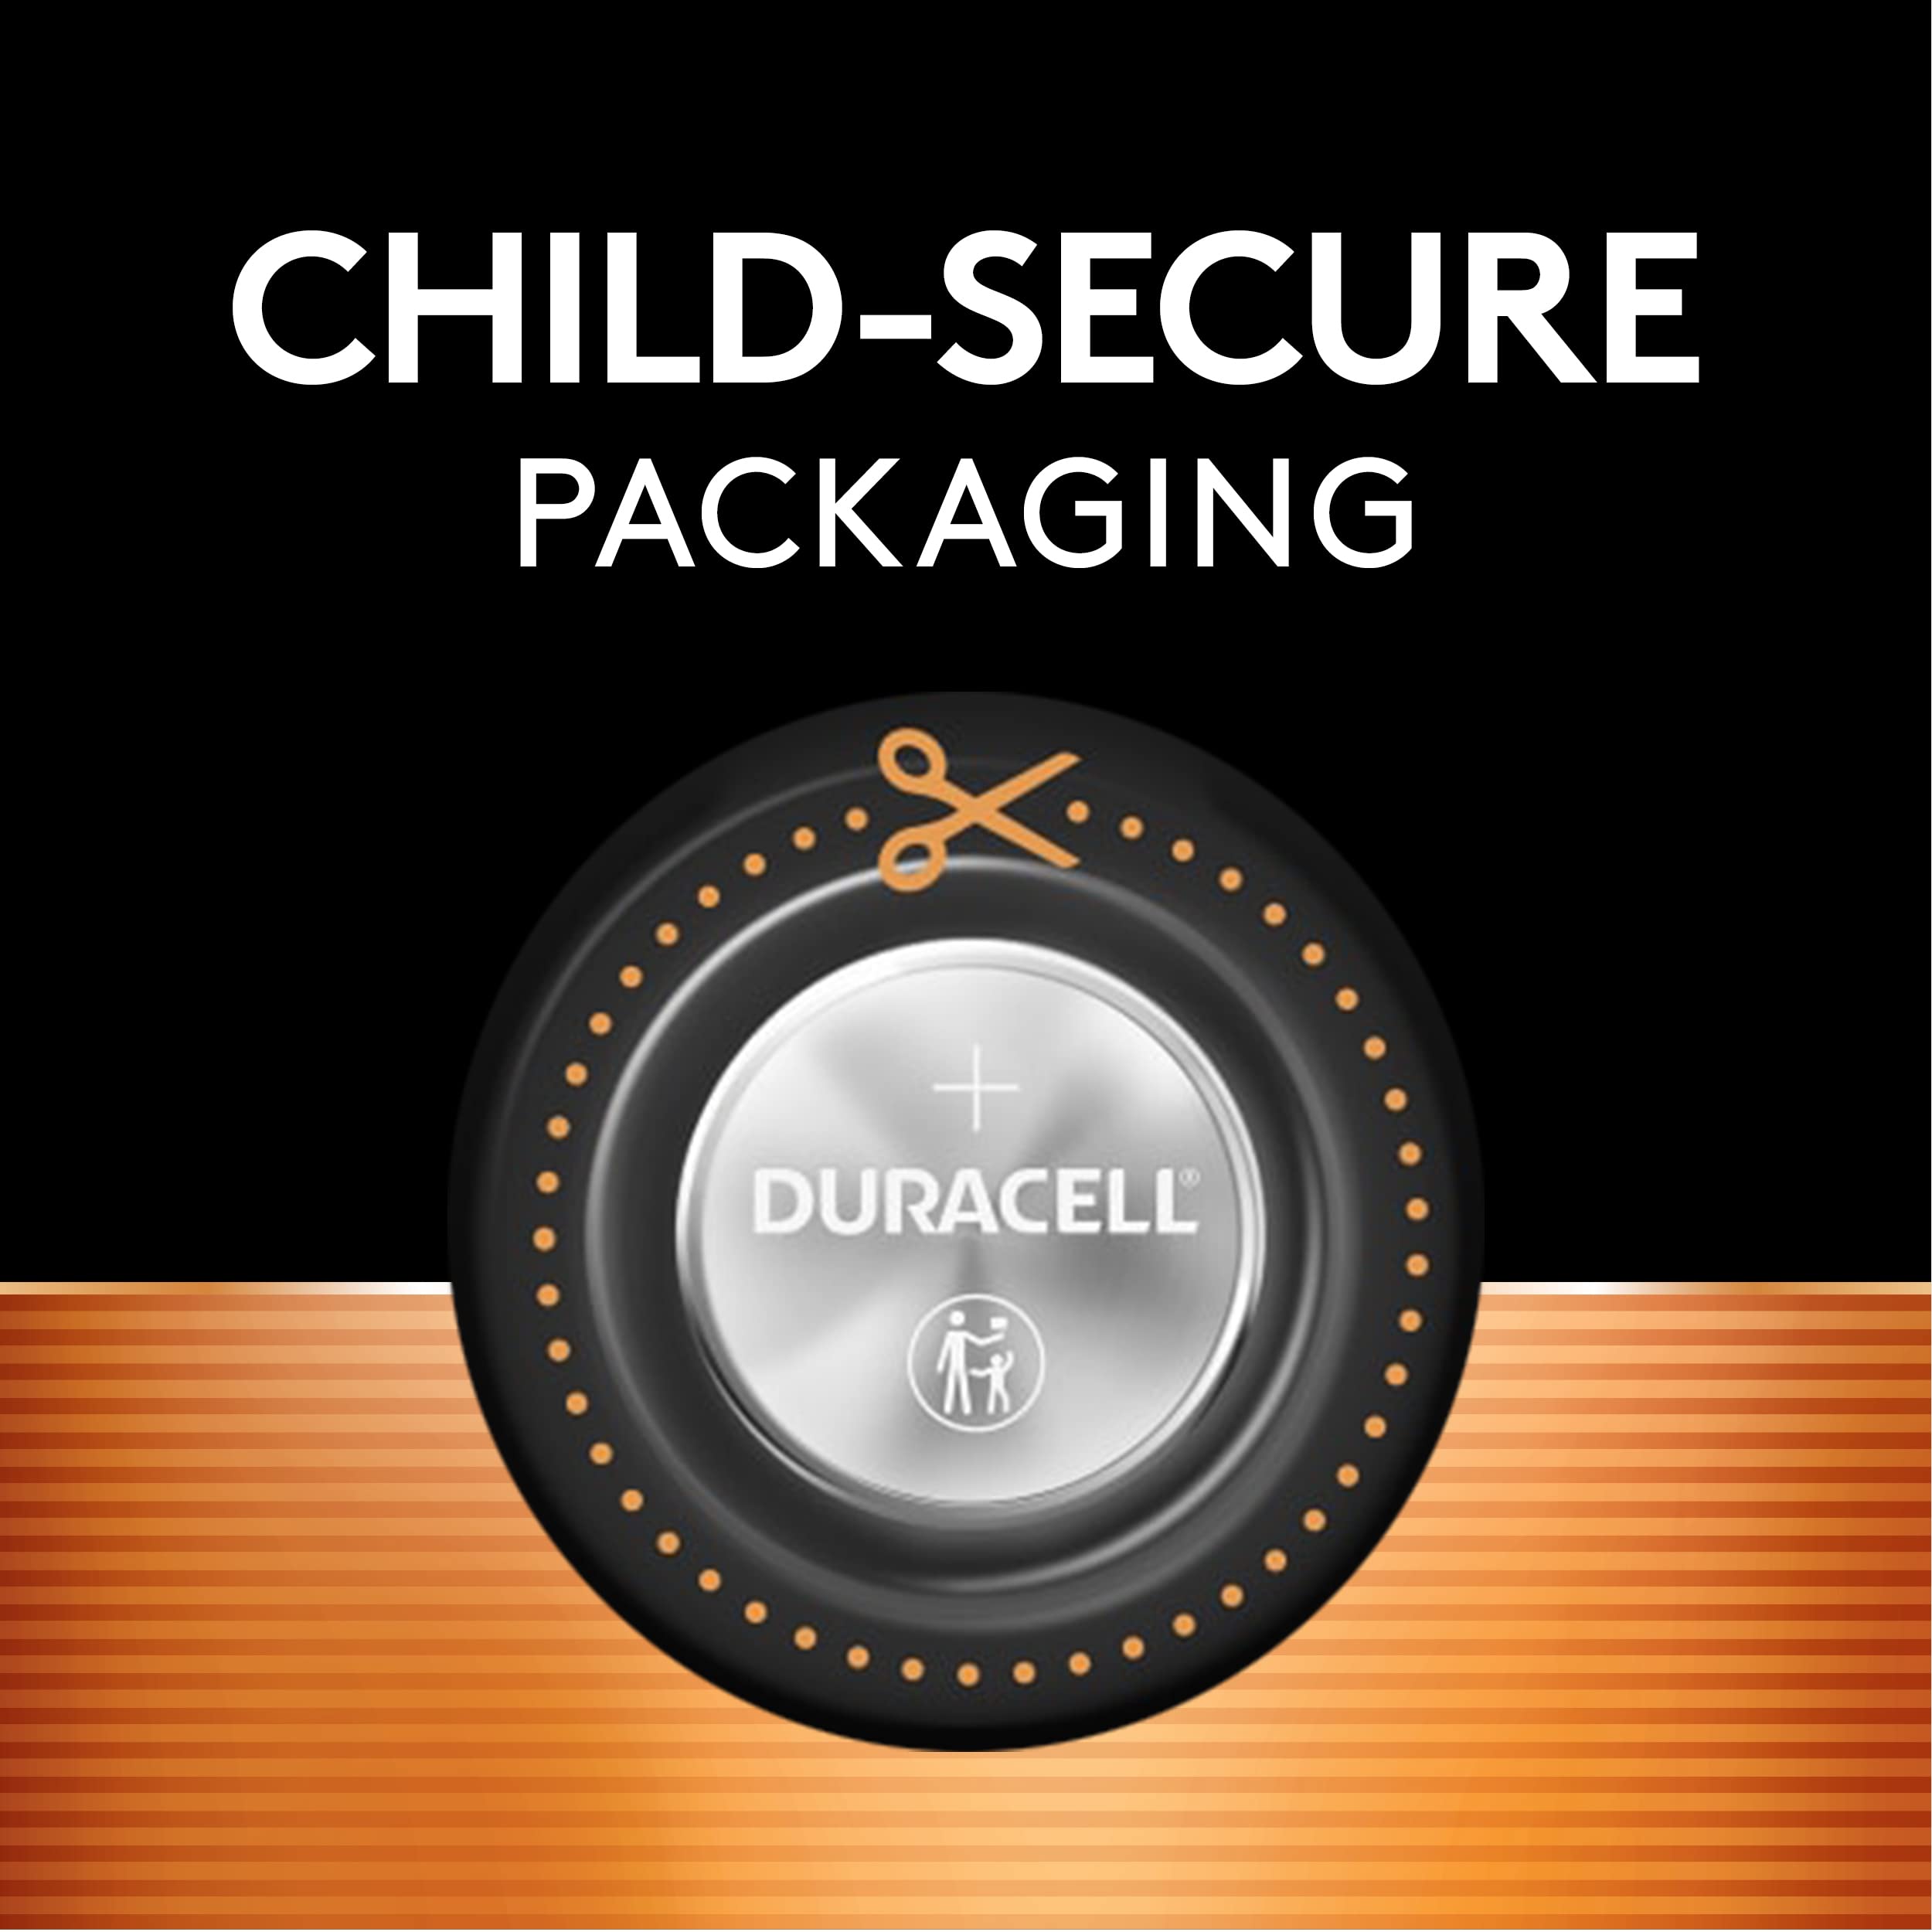 Duracell CR2025 3V Lithium Battery, Child Safety Features, 4 Count Pack, Lithium Coin Battery for Key Fob, Car Remote, Glucose Monitor, CR Lithium 3 Volt Cell